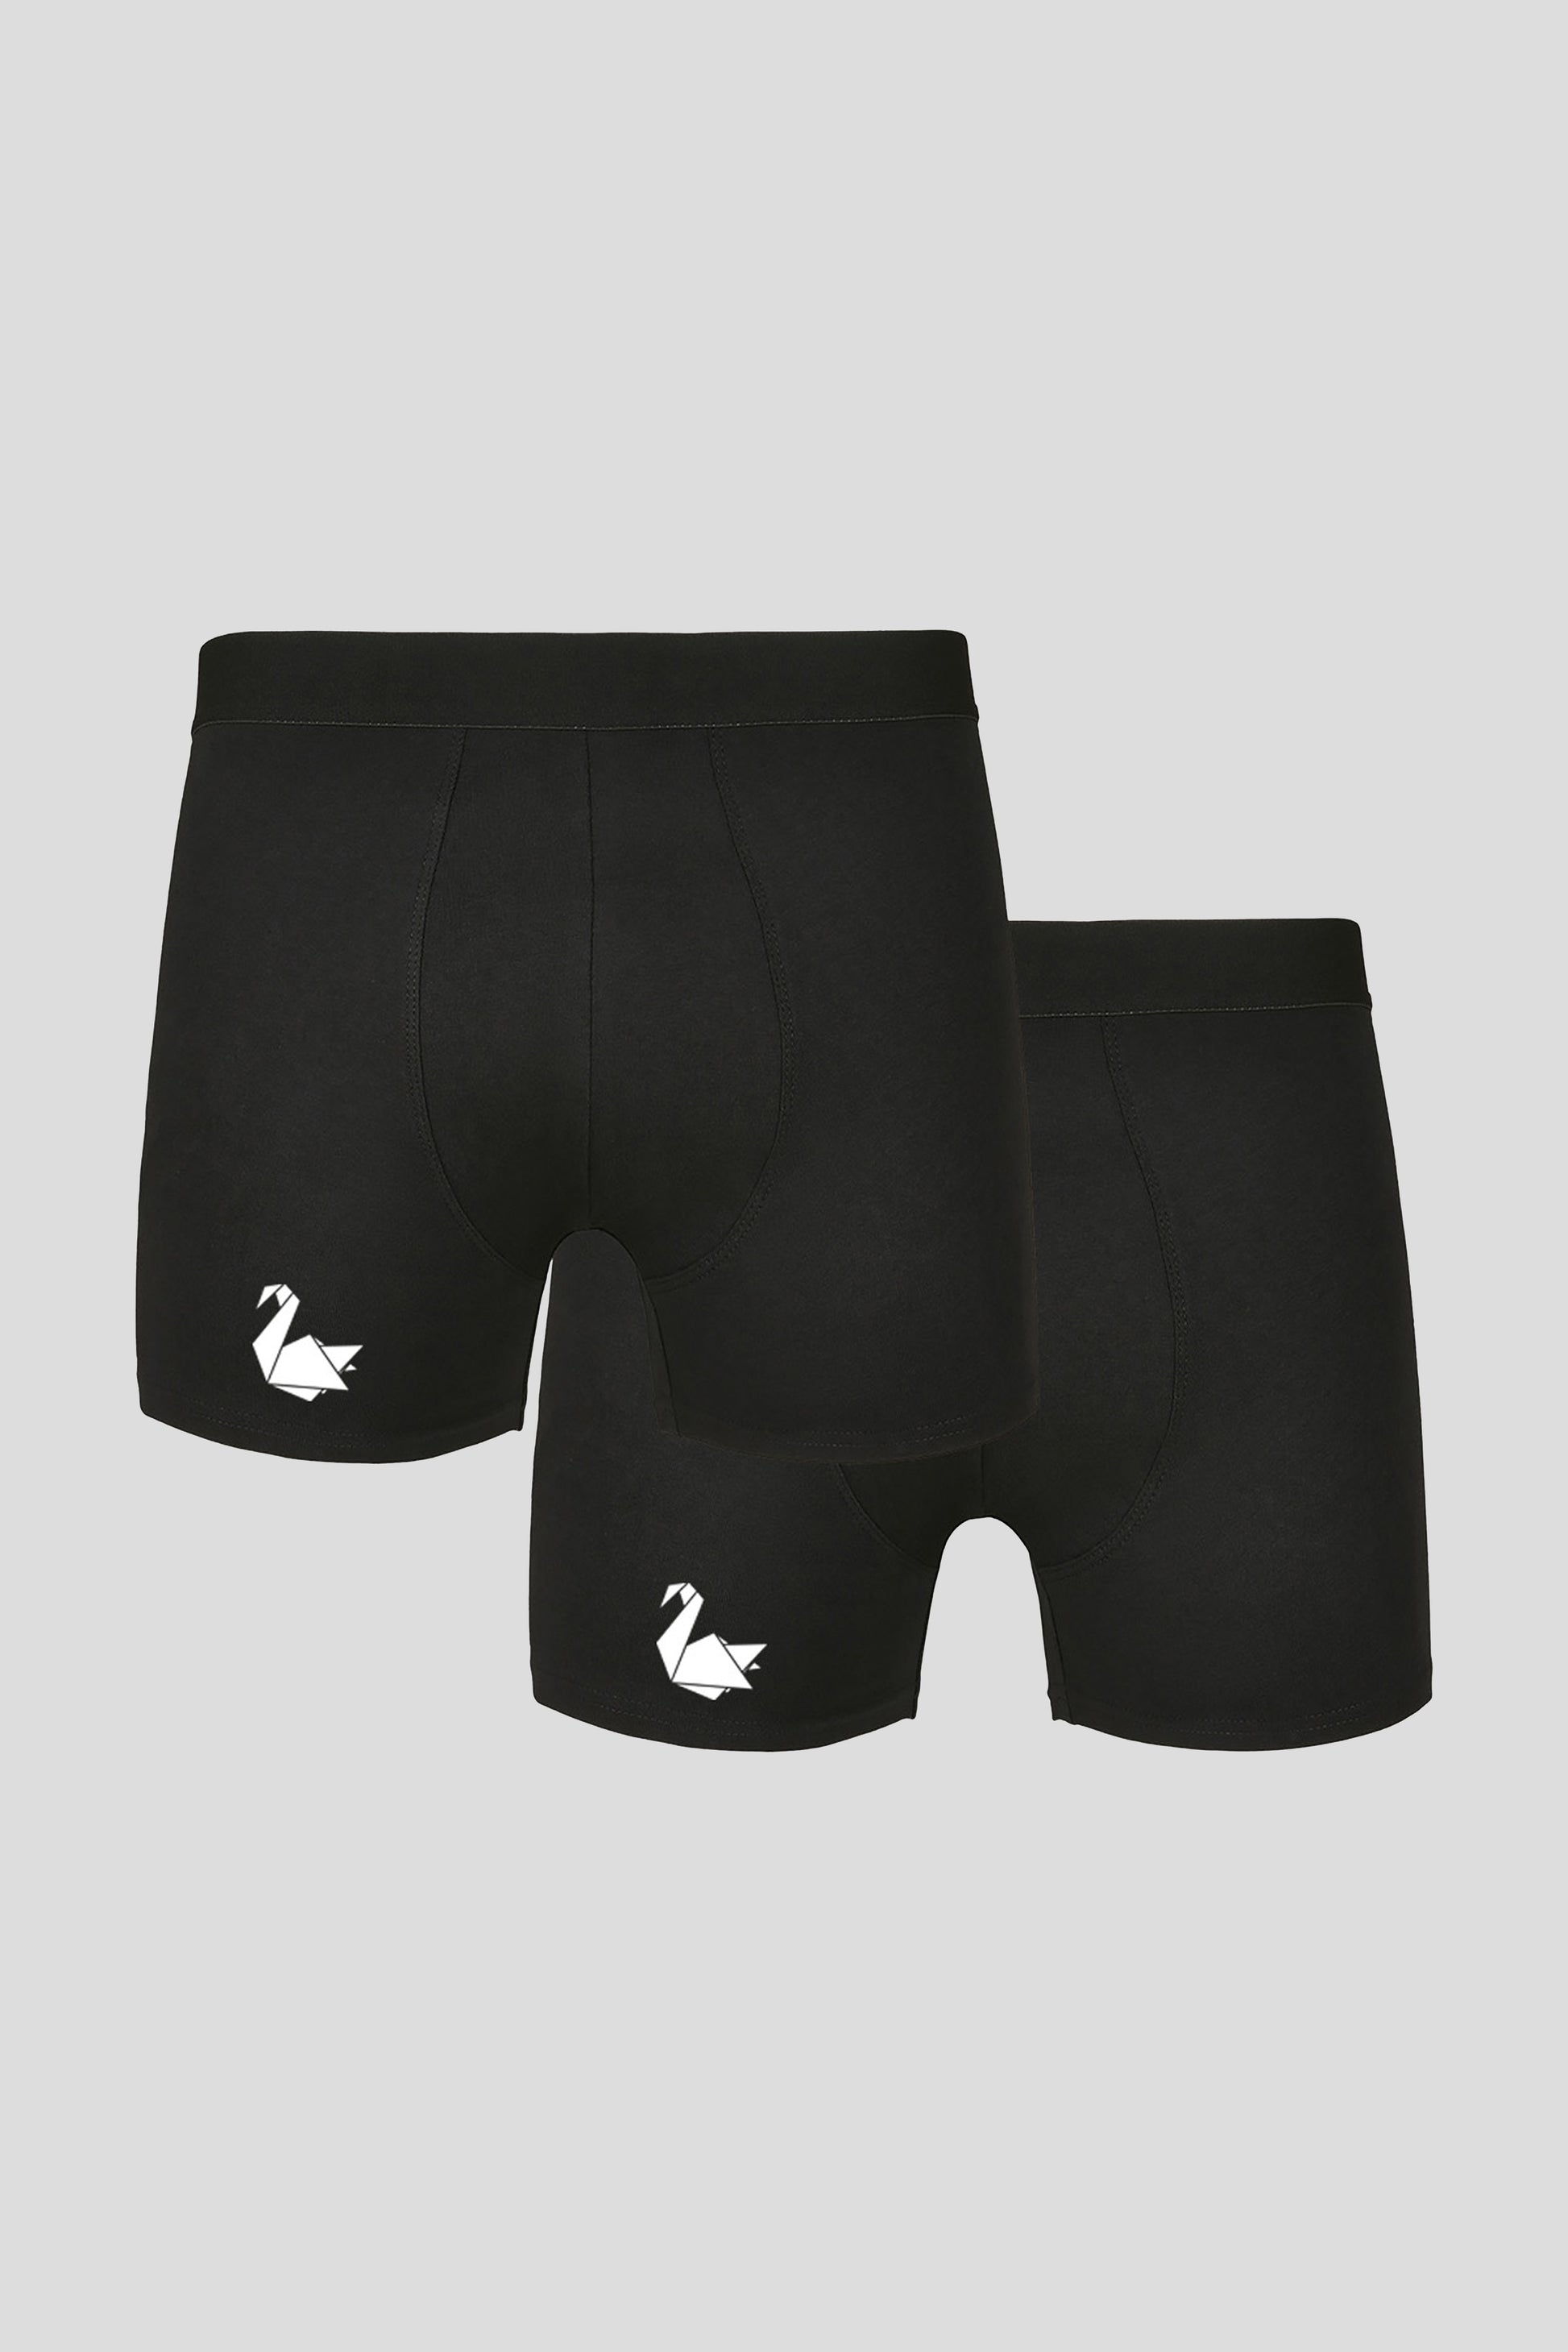 Swanlife Underwear Trunk Duo Pack - Black - Swanlife Fashion